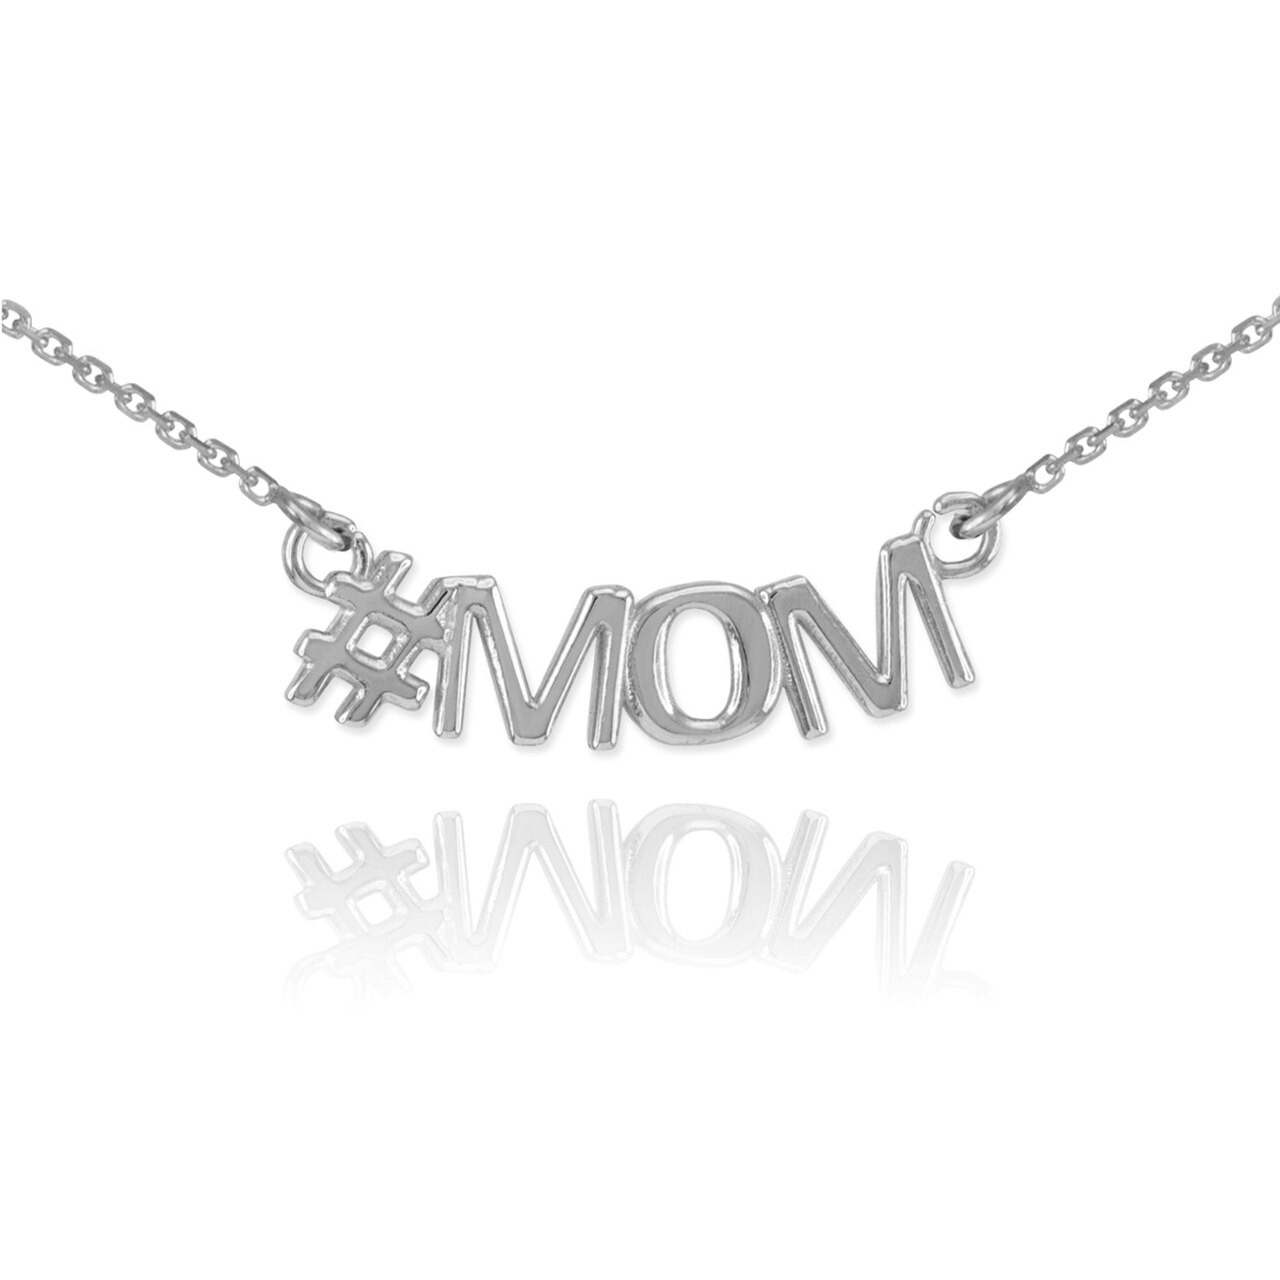 Mom Necklace White Gold
 14k White Gold MOM Necklace